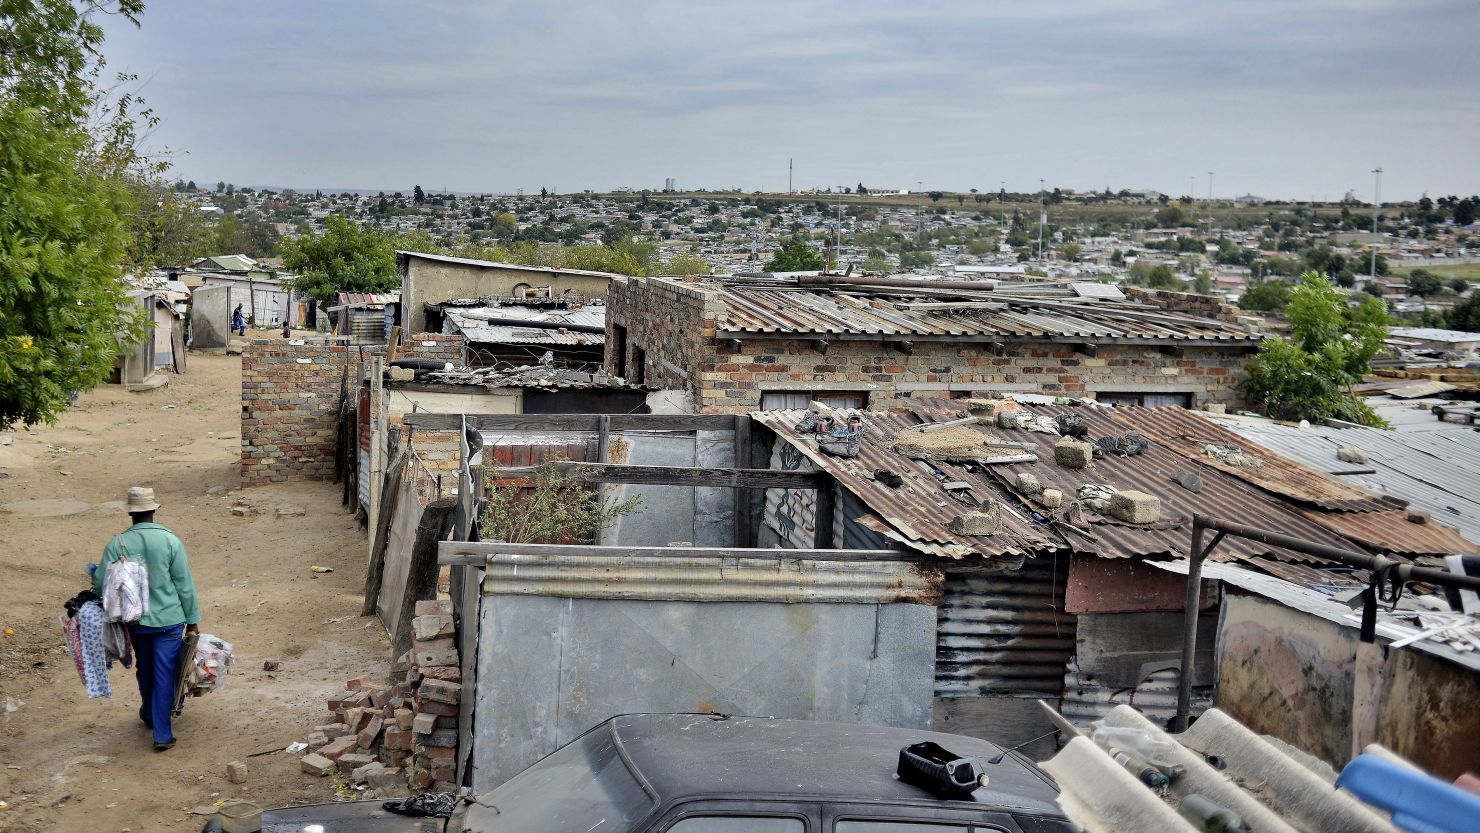 How can we tackle inequality in impoverished areas like the Diepsloot township outside Johannesburg?